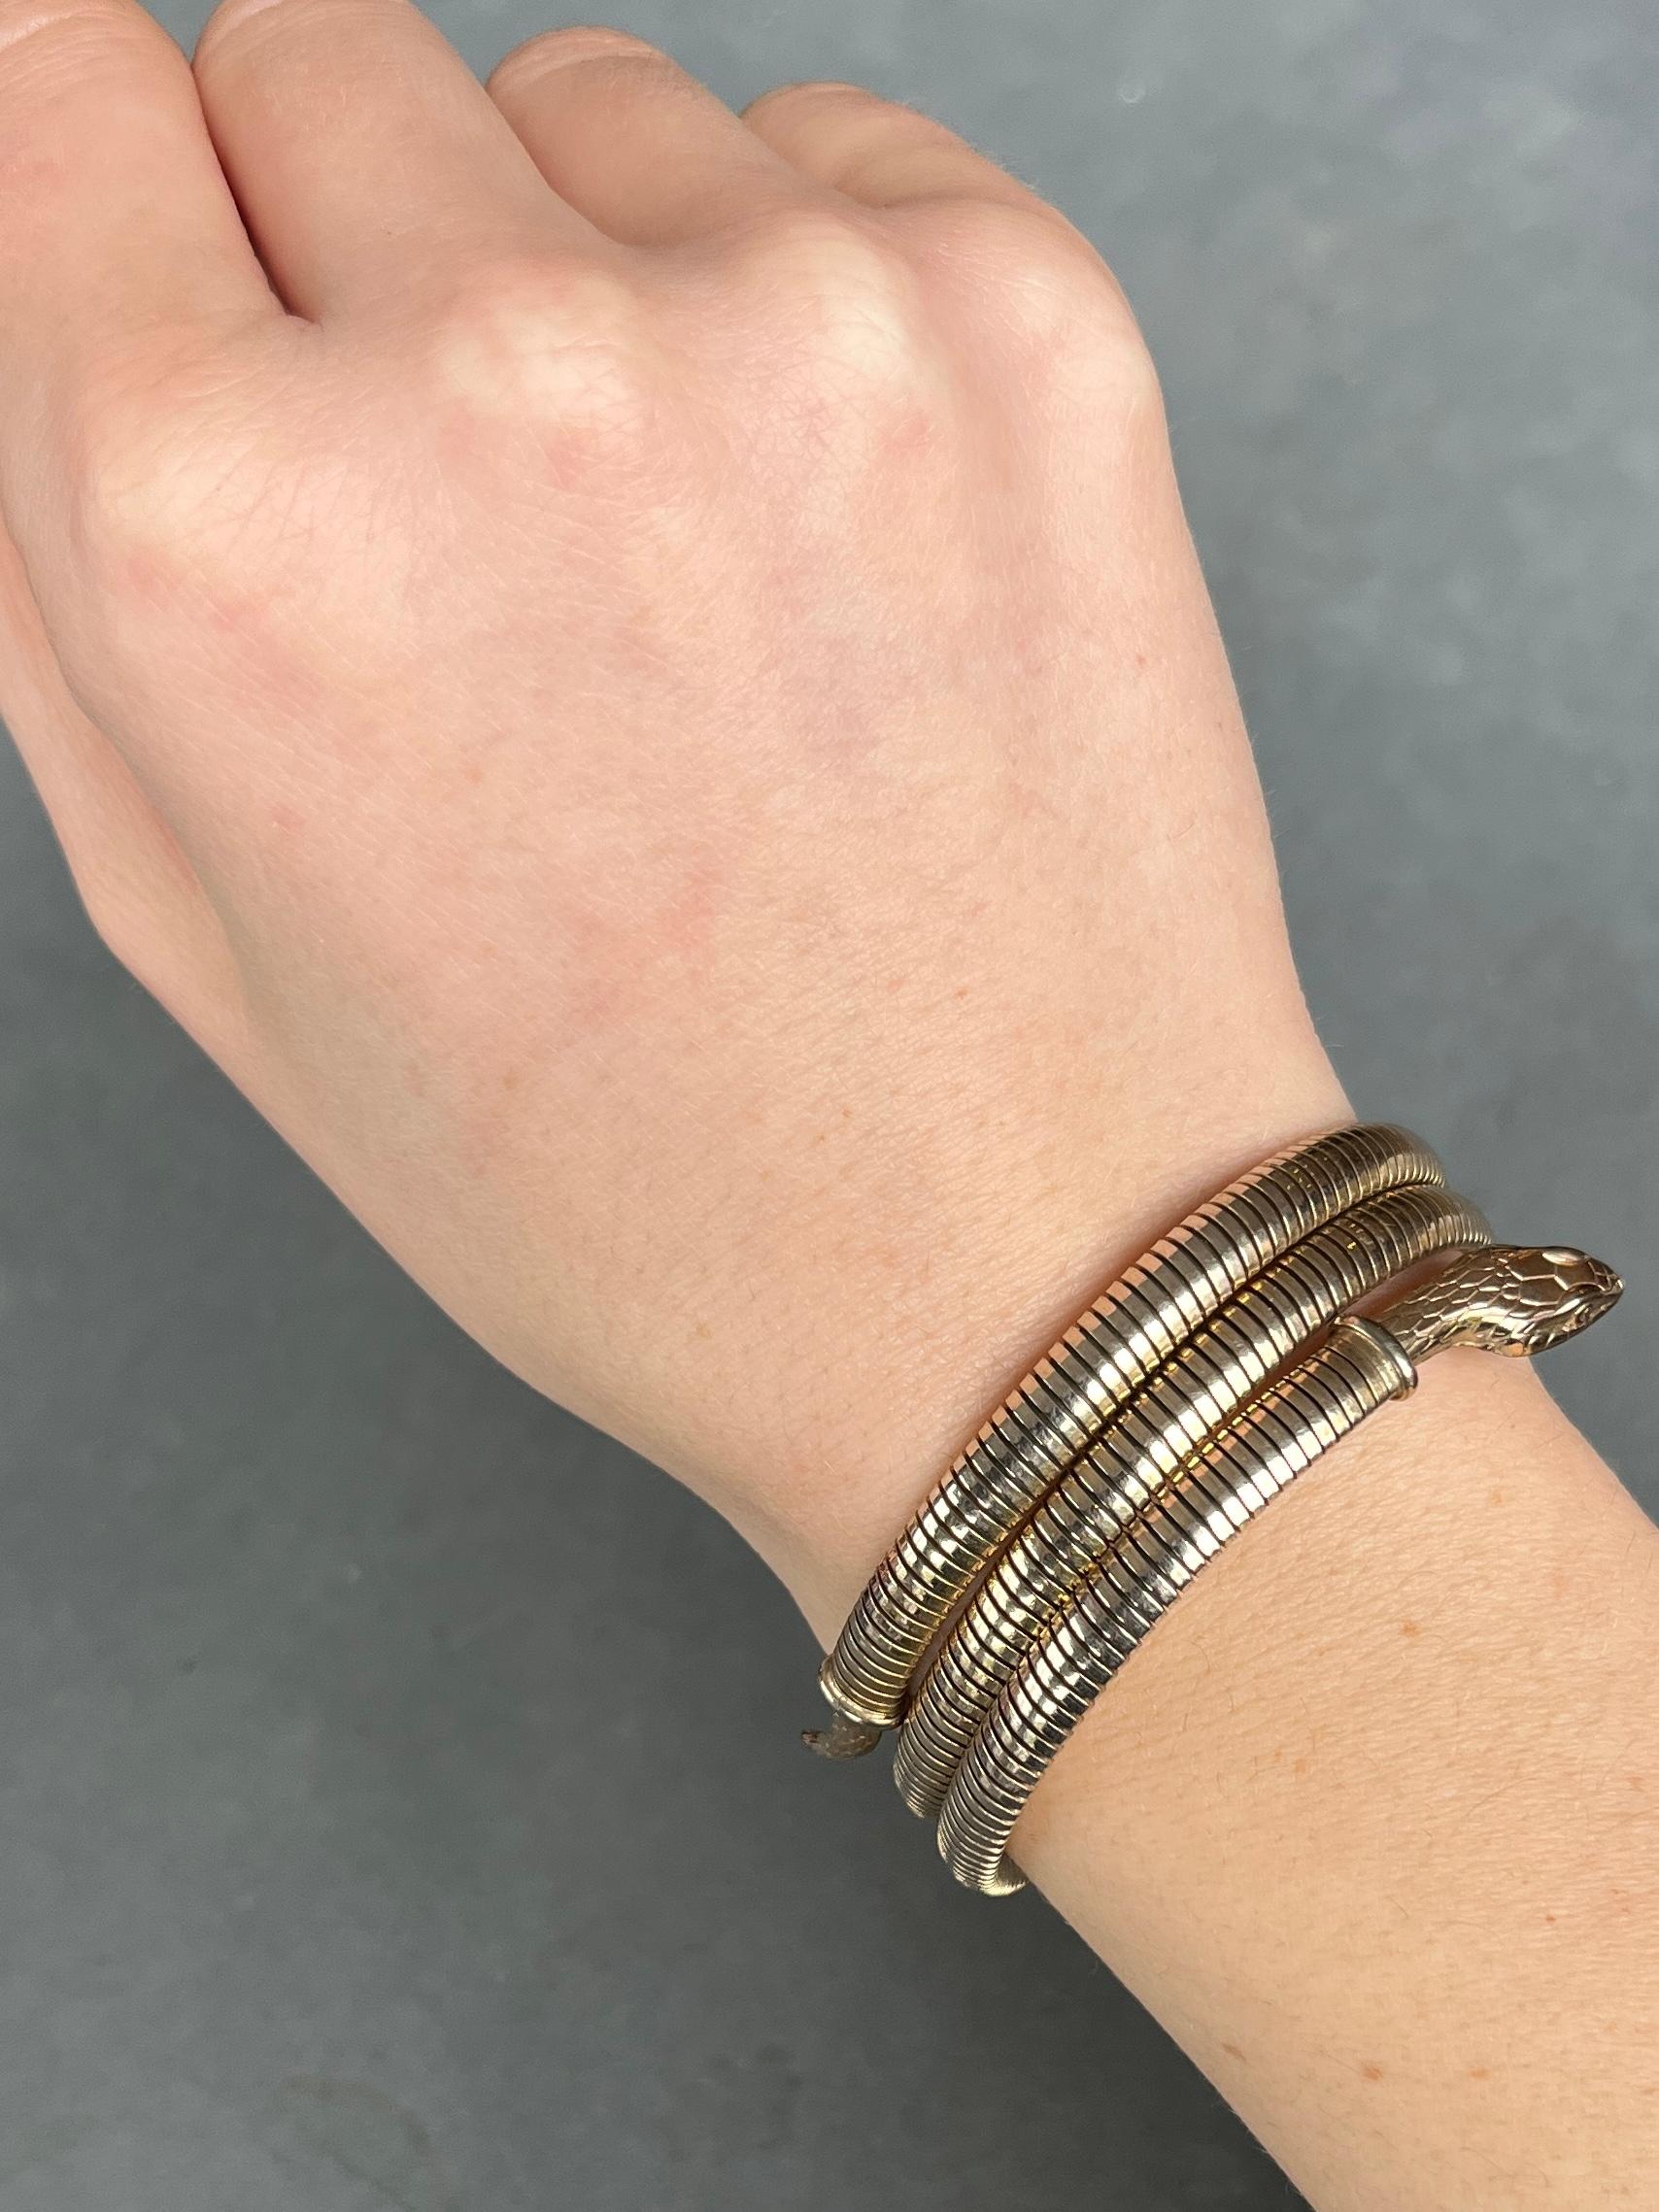 This lovely rolled gold snake bracelet is steel sprung so will fit any wrist. It is rolled gold which means it has a fine layer of gold coating over the bracelet. 

Inner Diameter: 55mm
Bangle Width (in total): 30mm

Weight: 29g